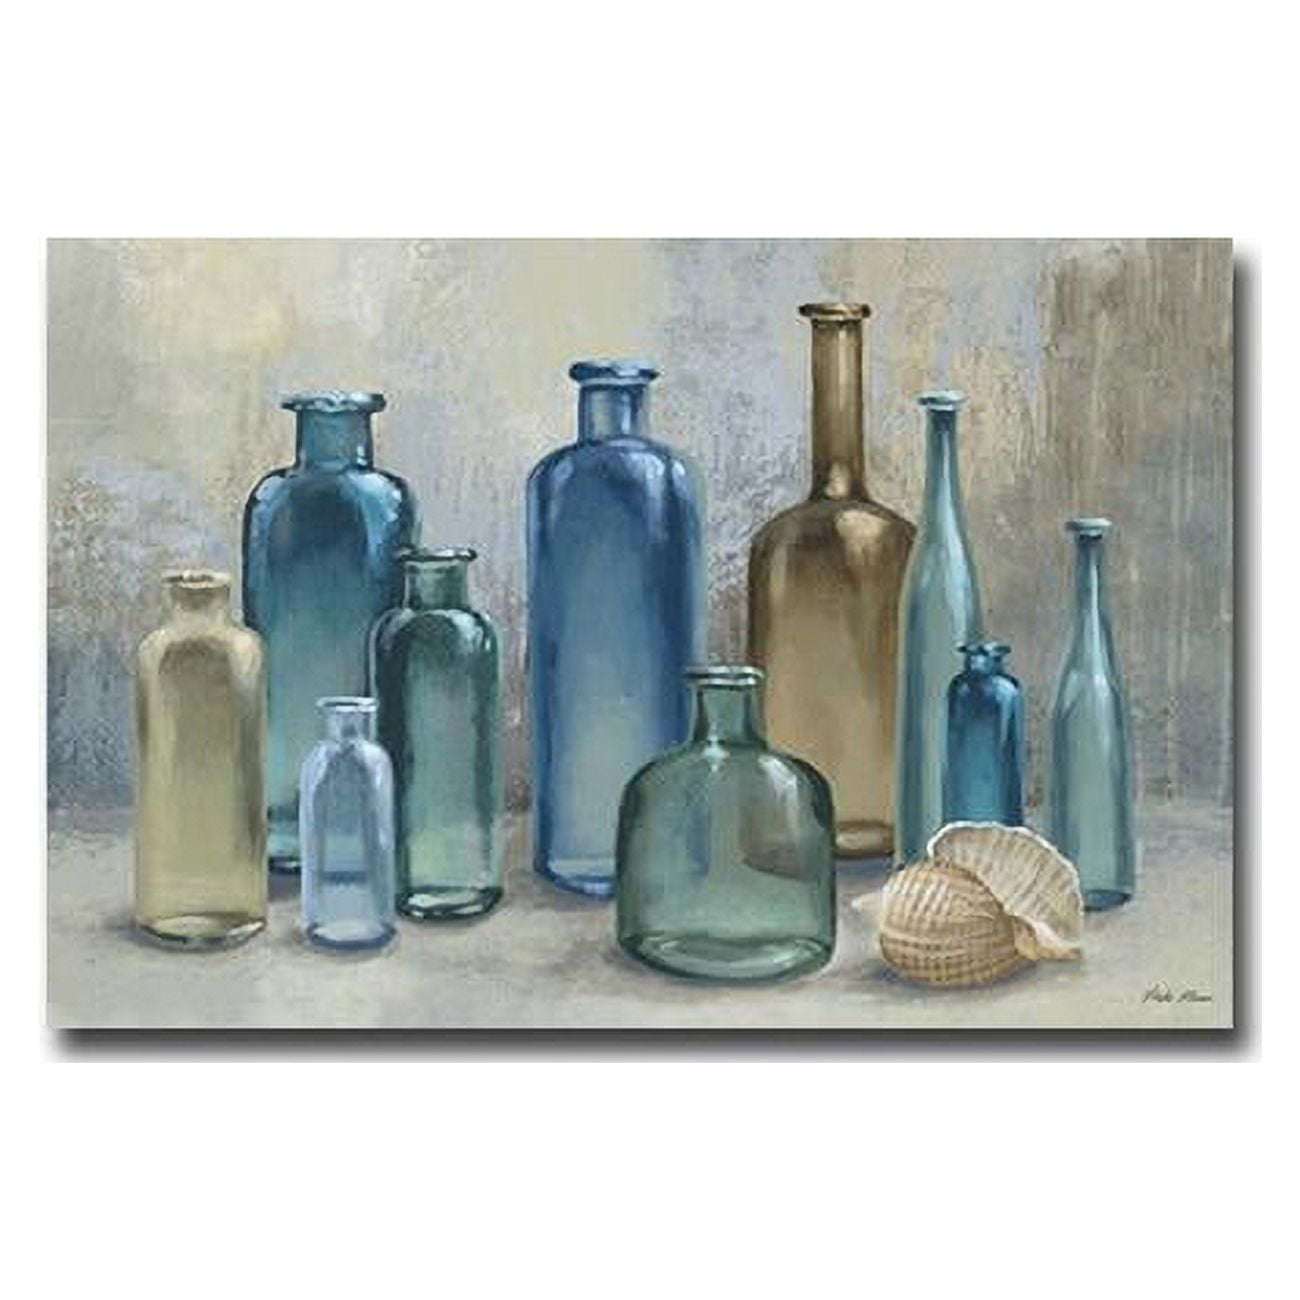 1624am992sg Glass Bottles By Michael Marcon Premium Gallery Wrapped Canvas Giclee Art - 16 X 24 X 1.5 In.